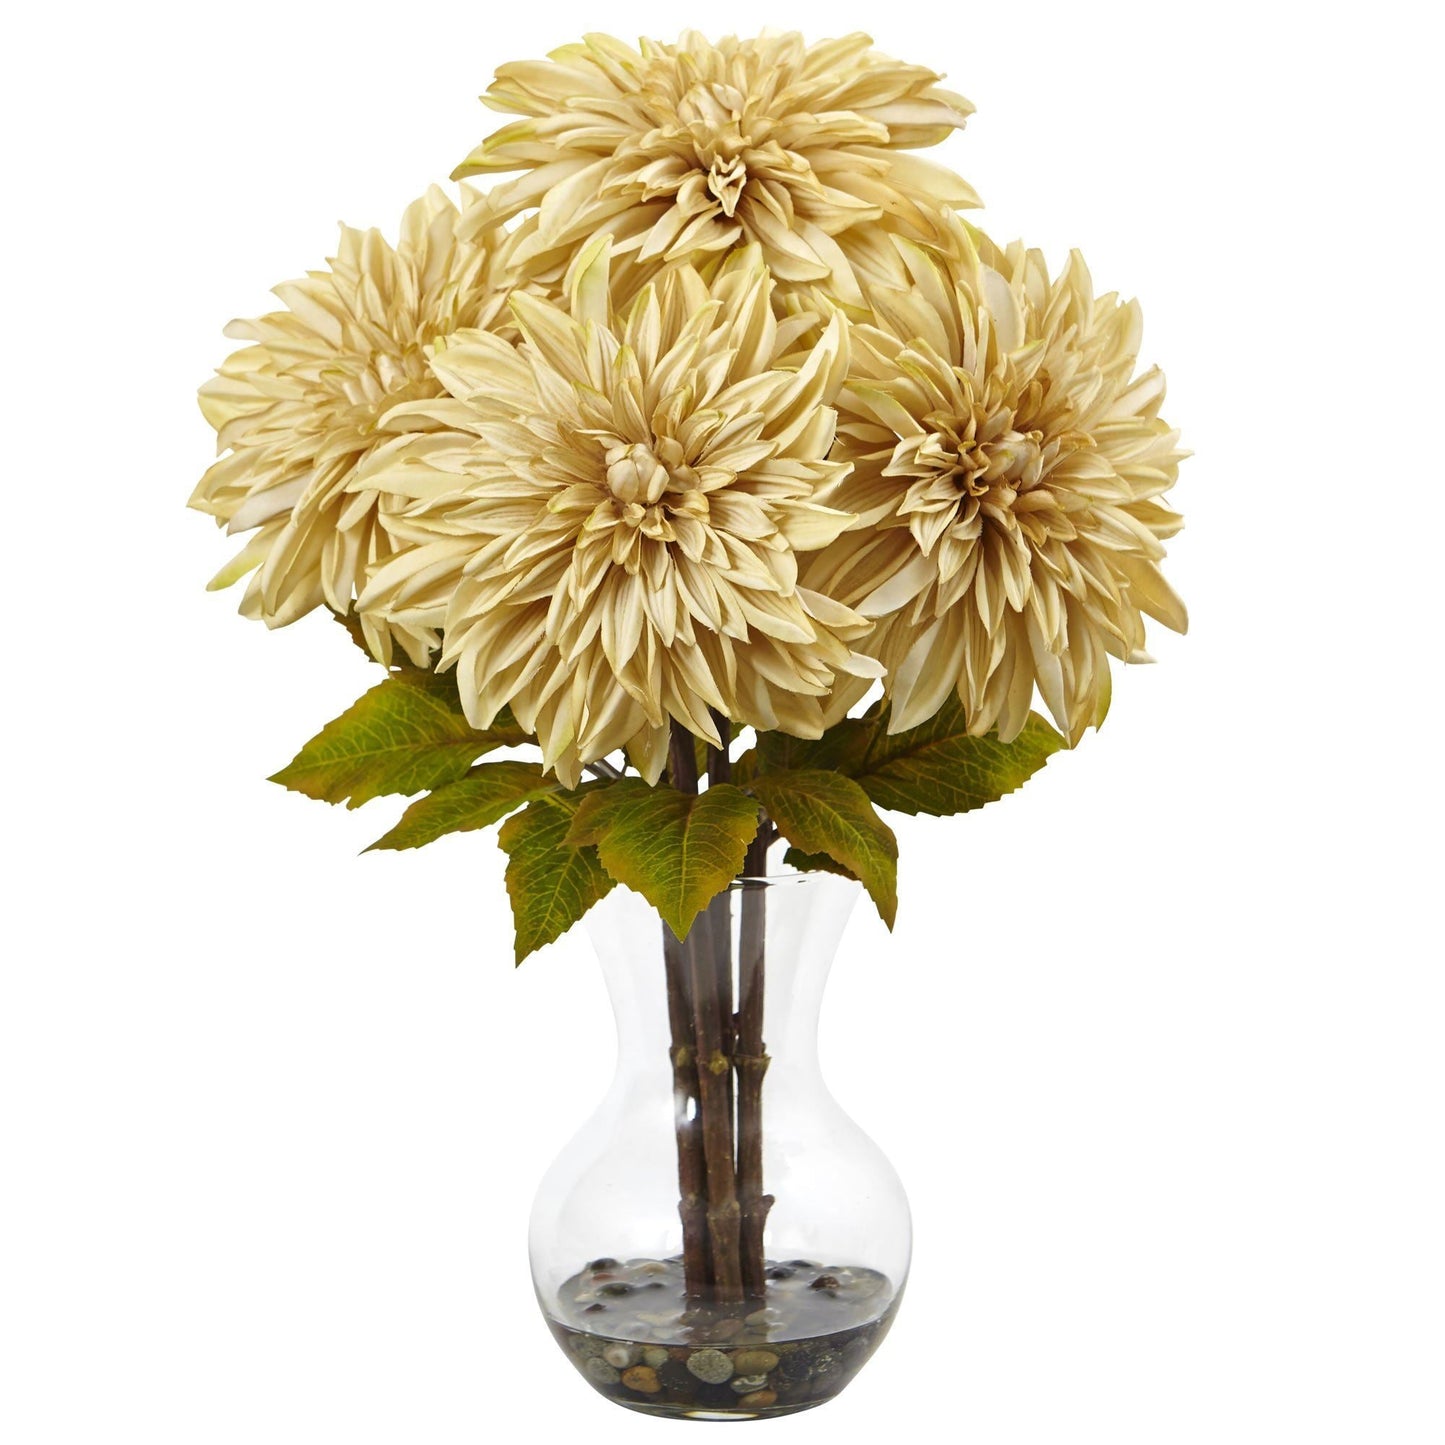 Dahlia Arrangement by Nearly Natural